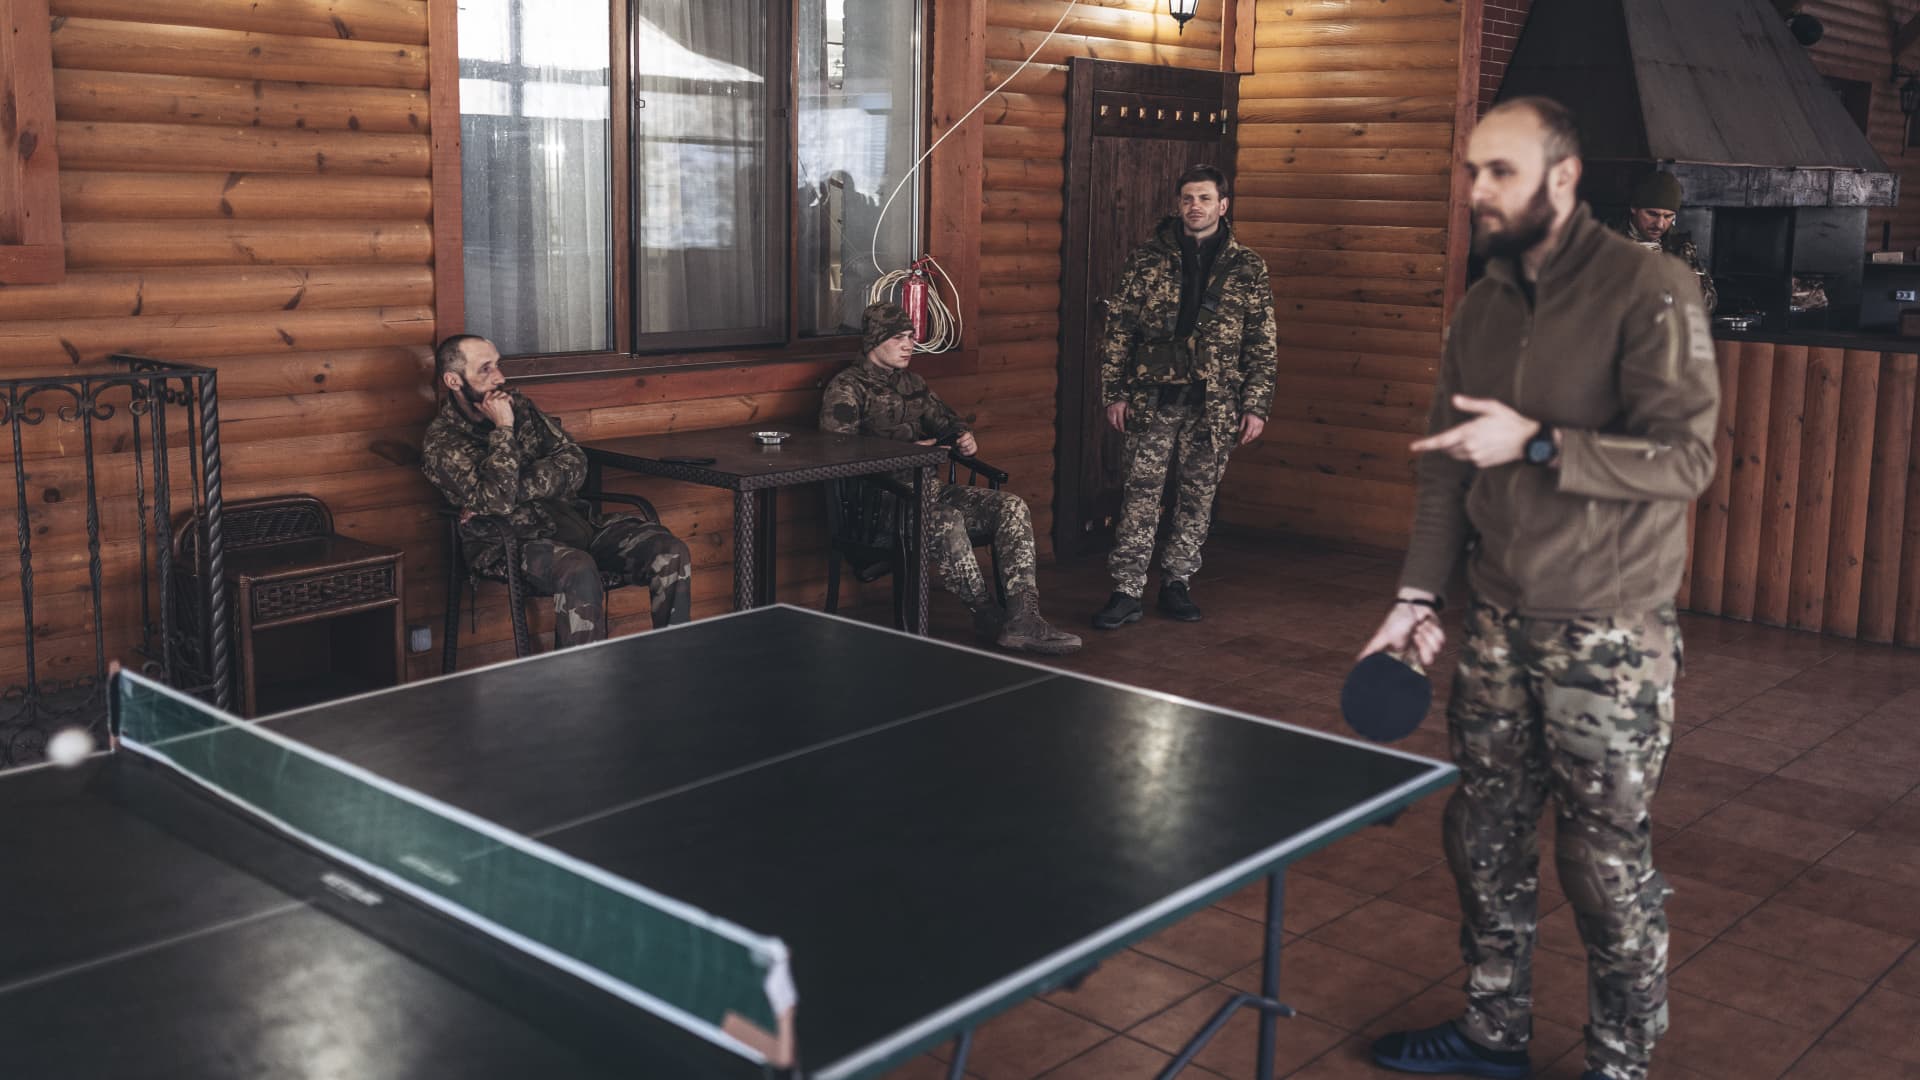 EASTERN UKRAINE, UKRAINE - MARCH 20: Ukrainian soldiers play table tennis at a rehabilitation center in eastern Ukraine as Russia-Ukraine war continues on March 20, 2023. (Photo by Diego Herrera Carcedo/Anadolu Agency via Getty Images)